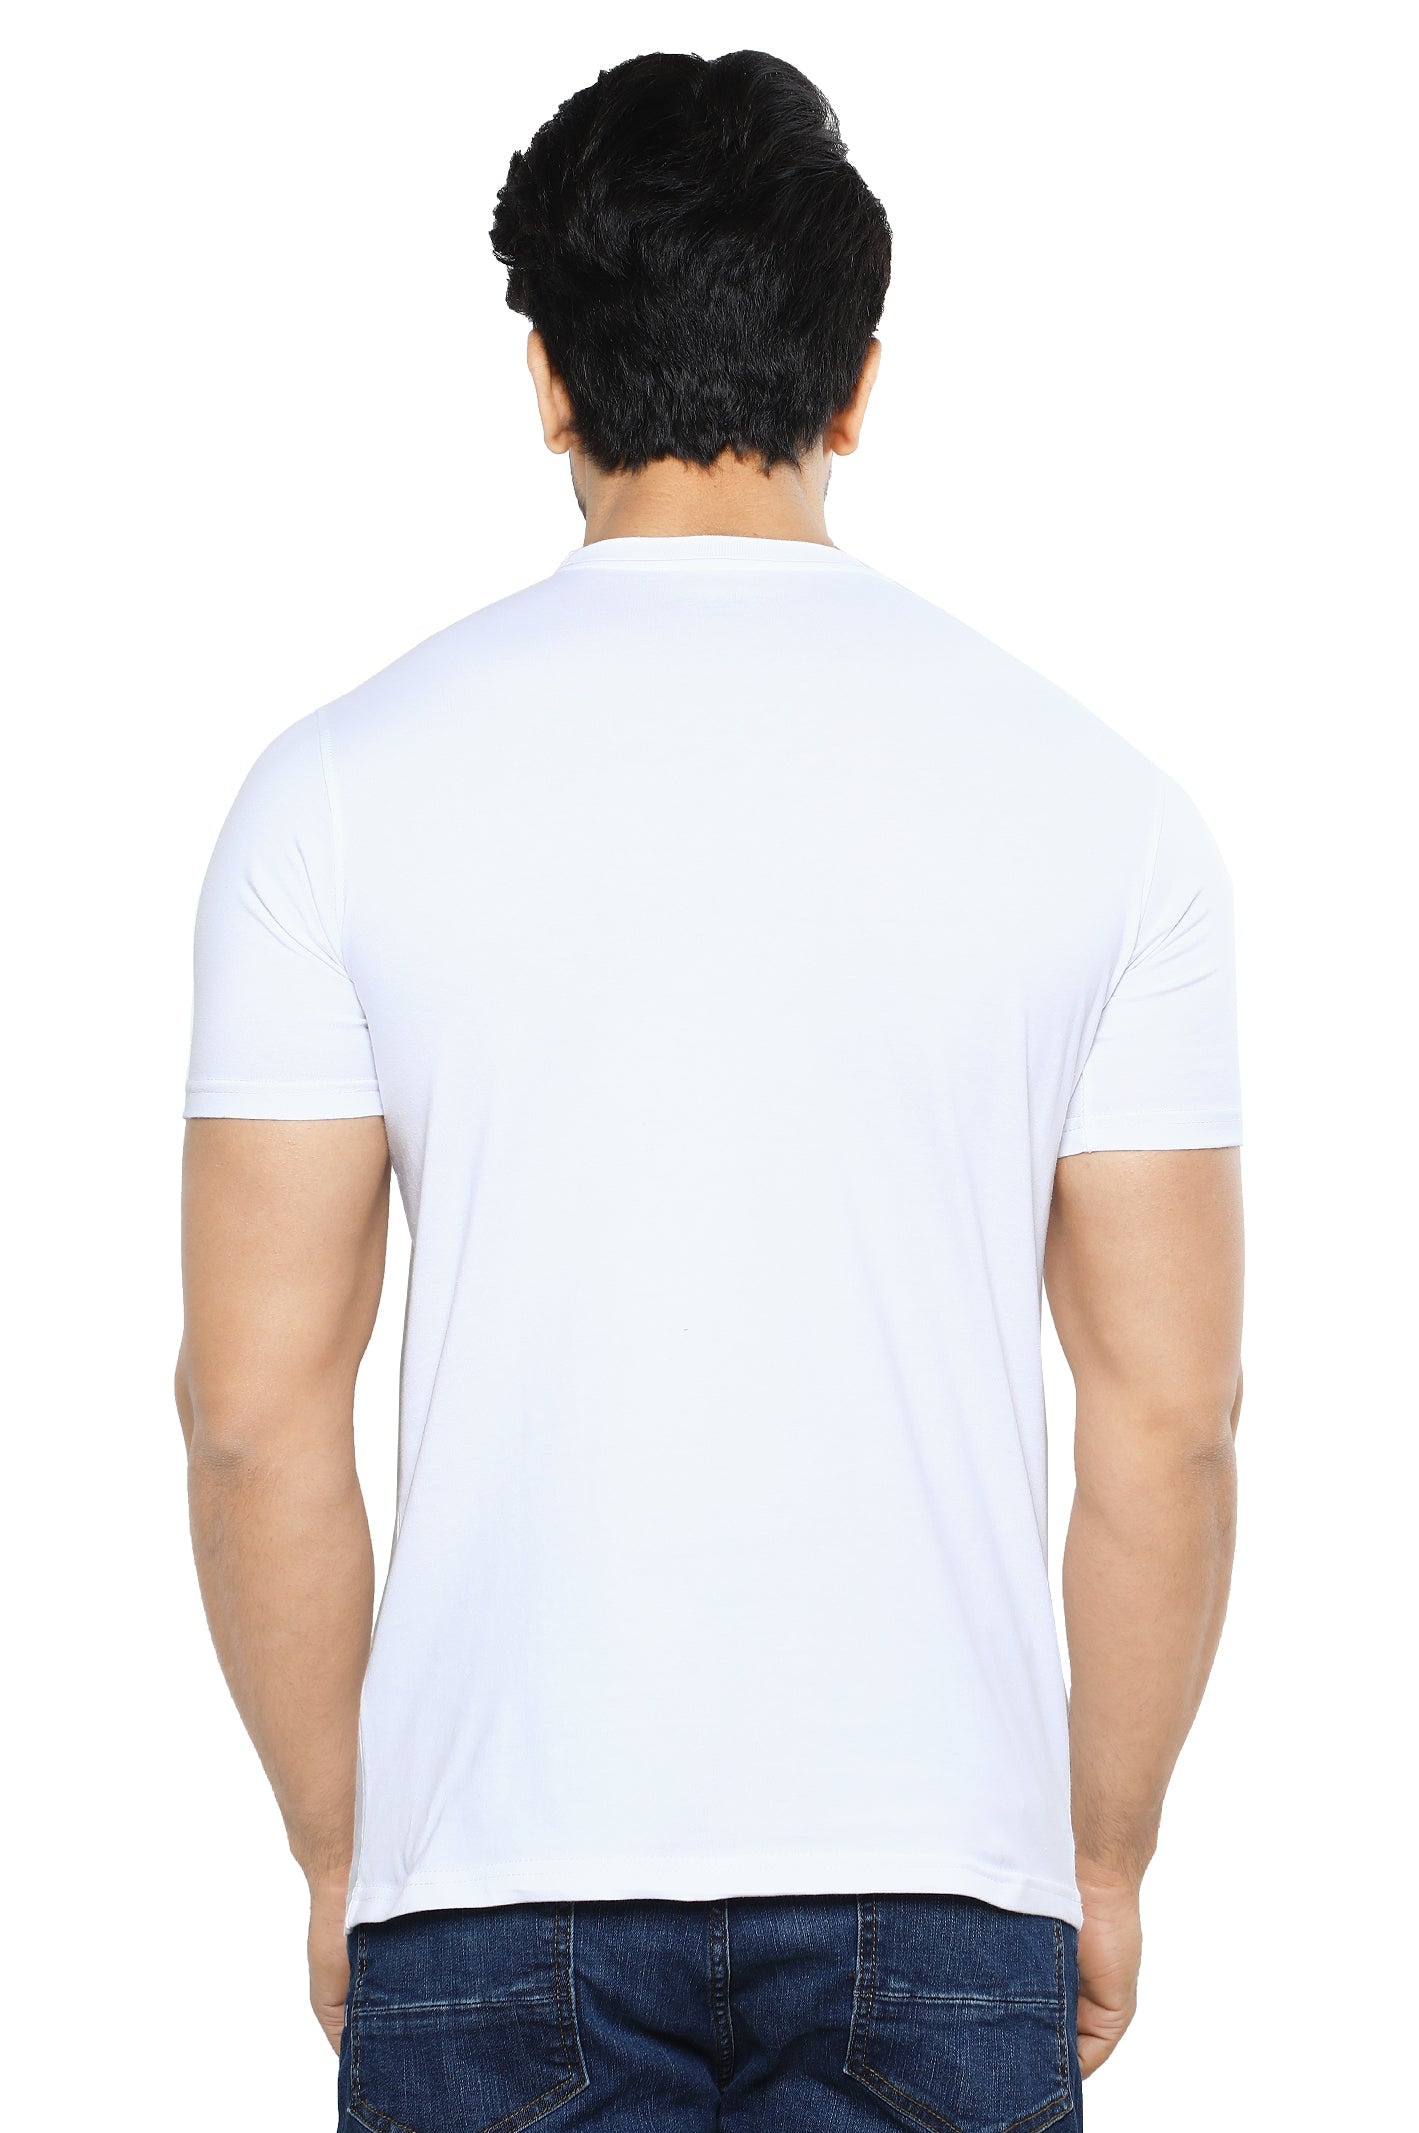 Diners Men's Round Neck T-Shirt SKU: NA856-WHITE - Diners